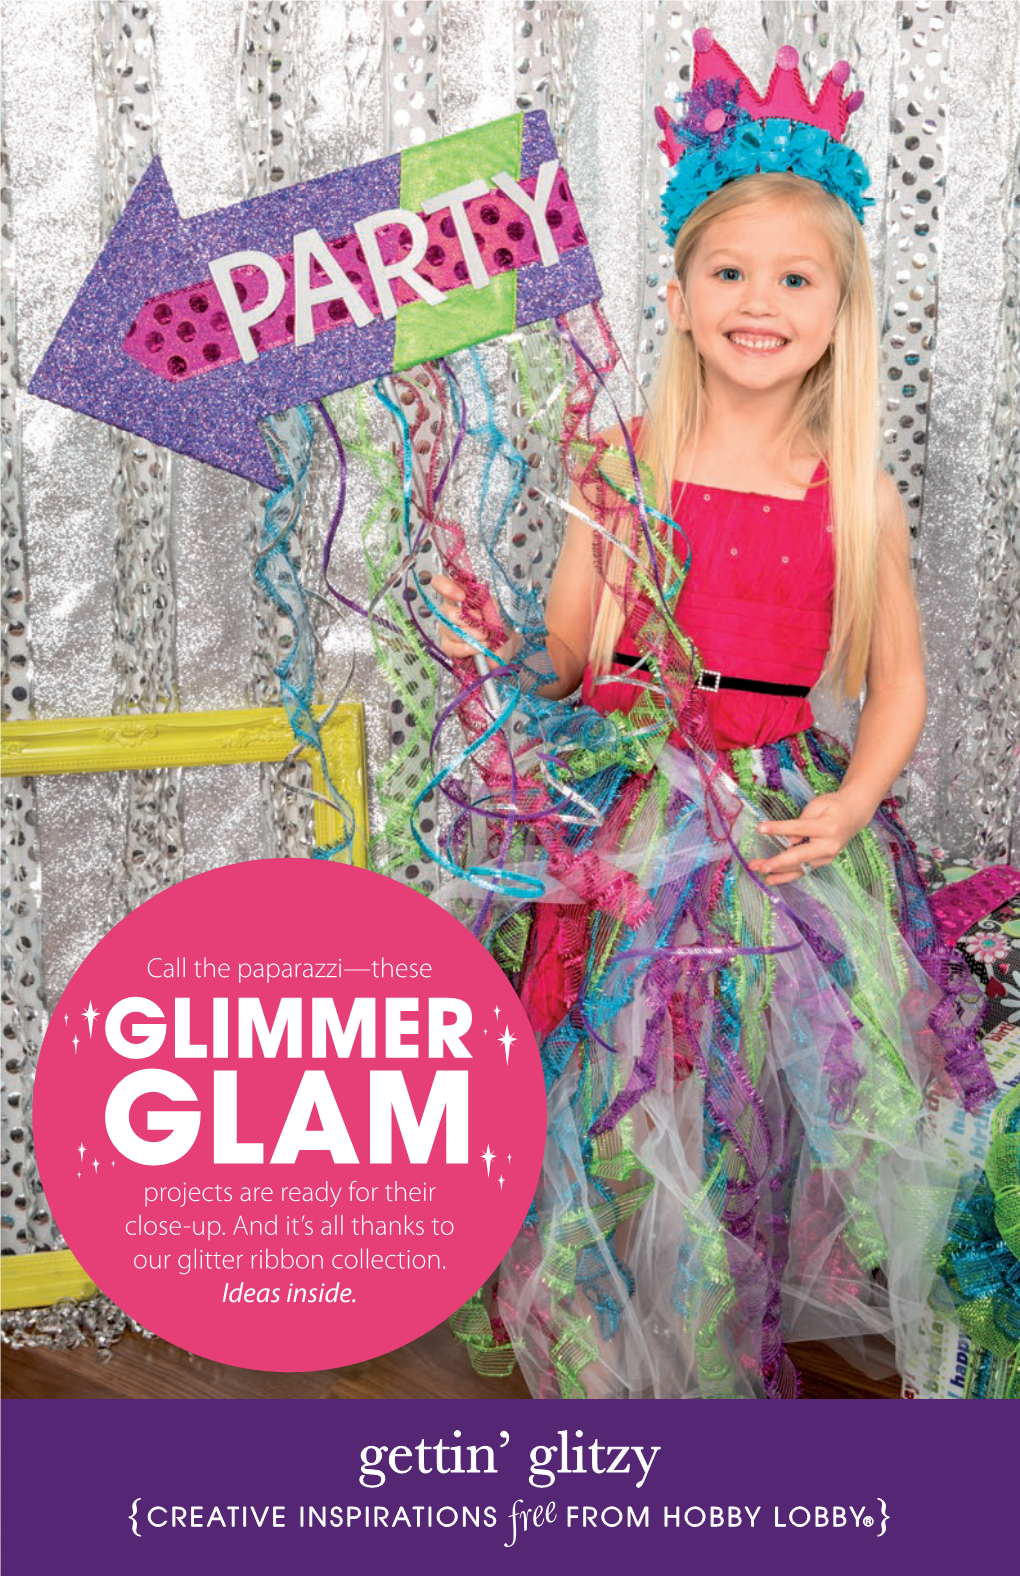 GLIMMER GLAM Projects Are Ready for Their Close-Up